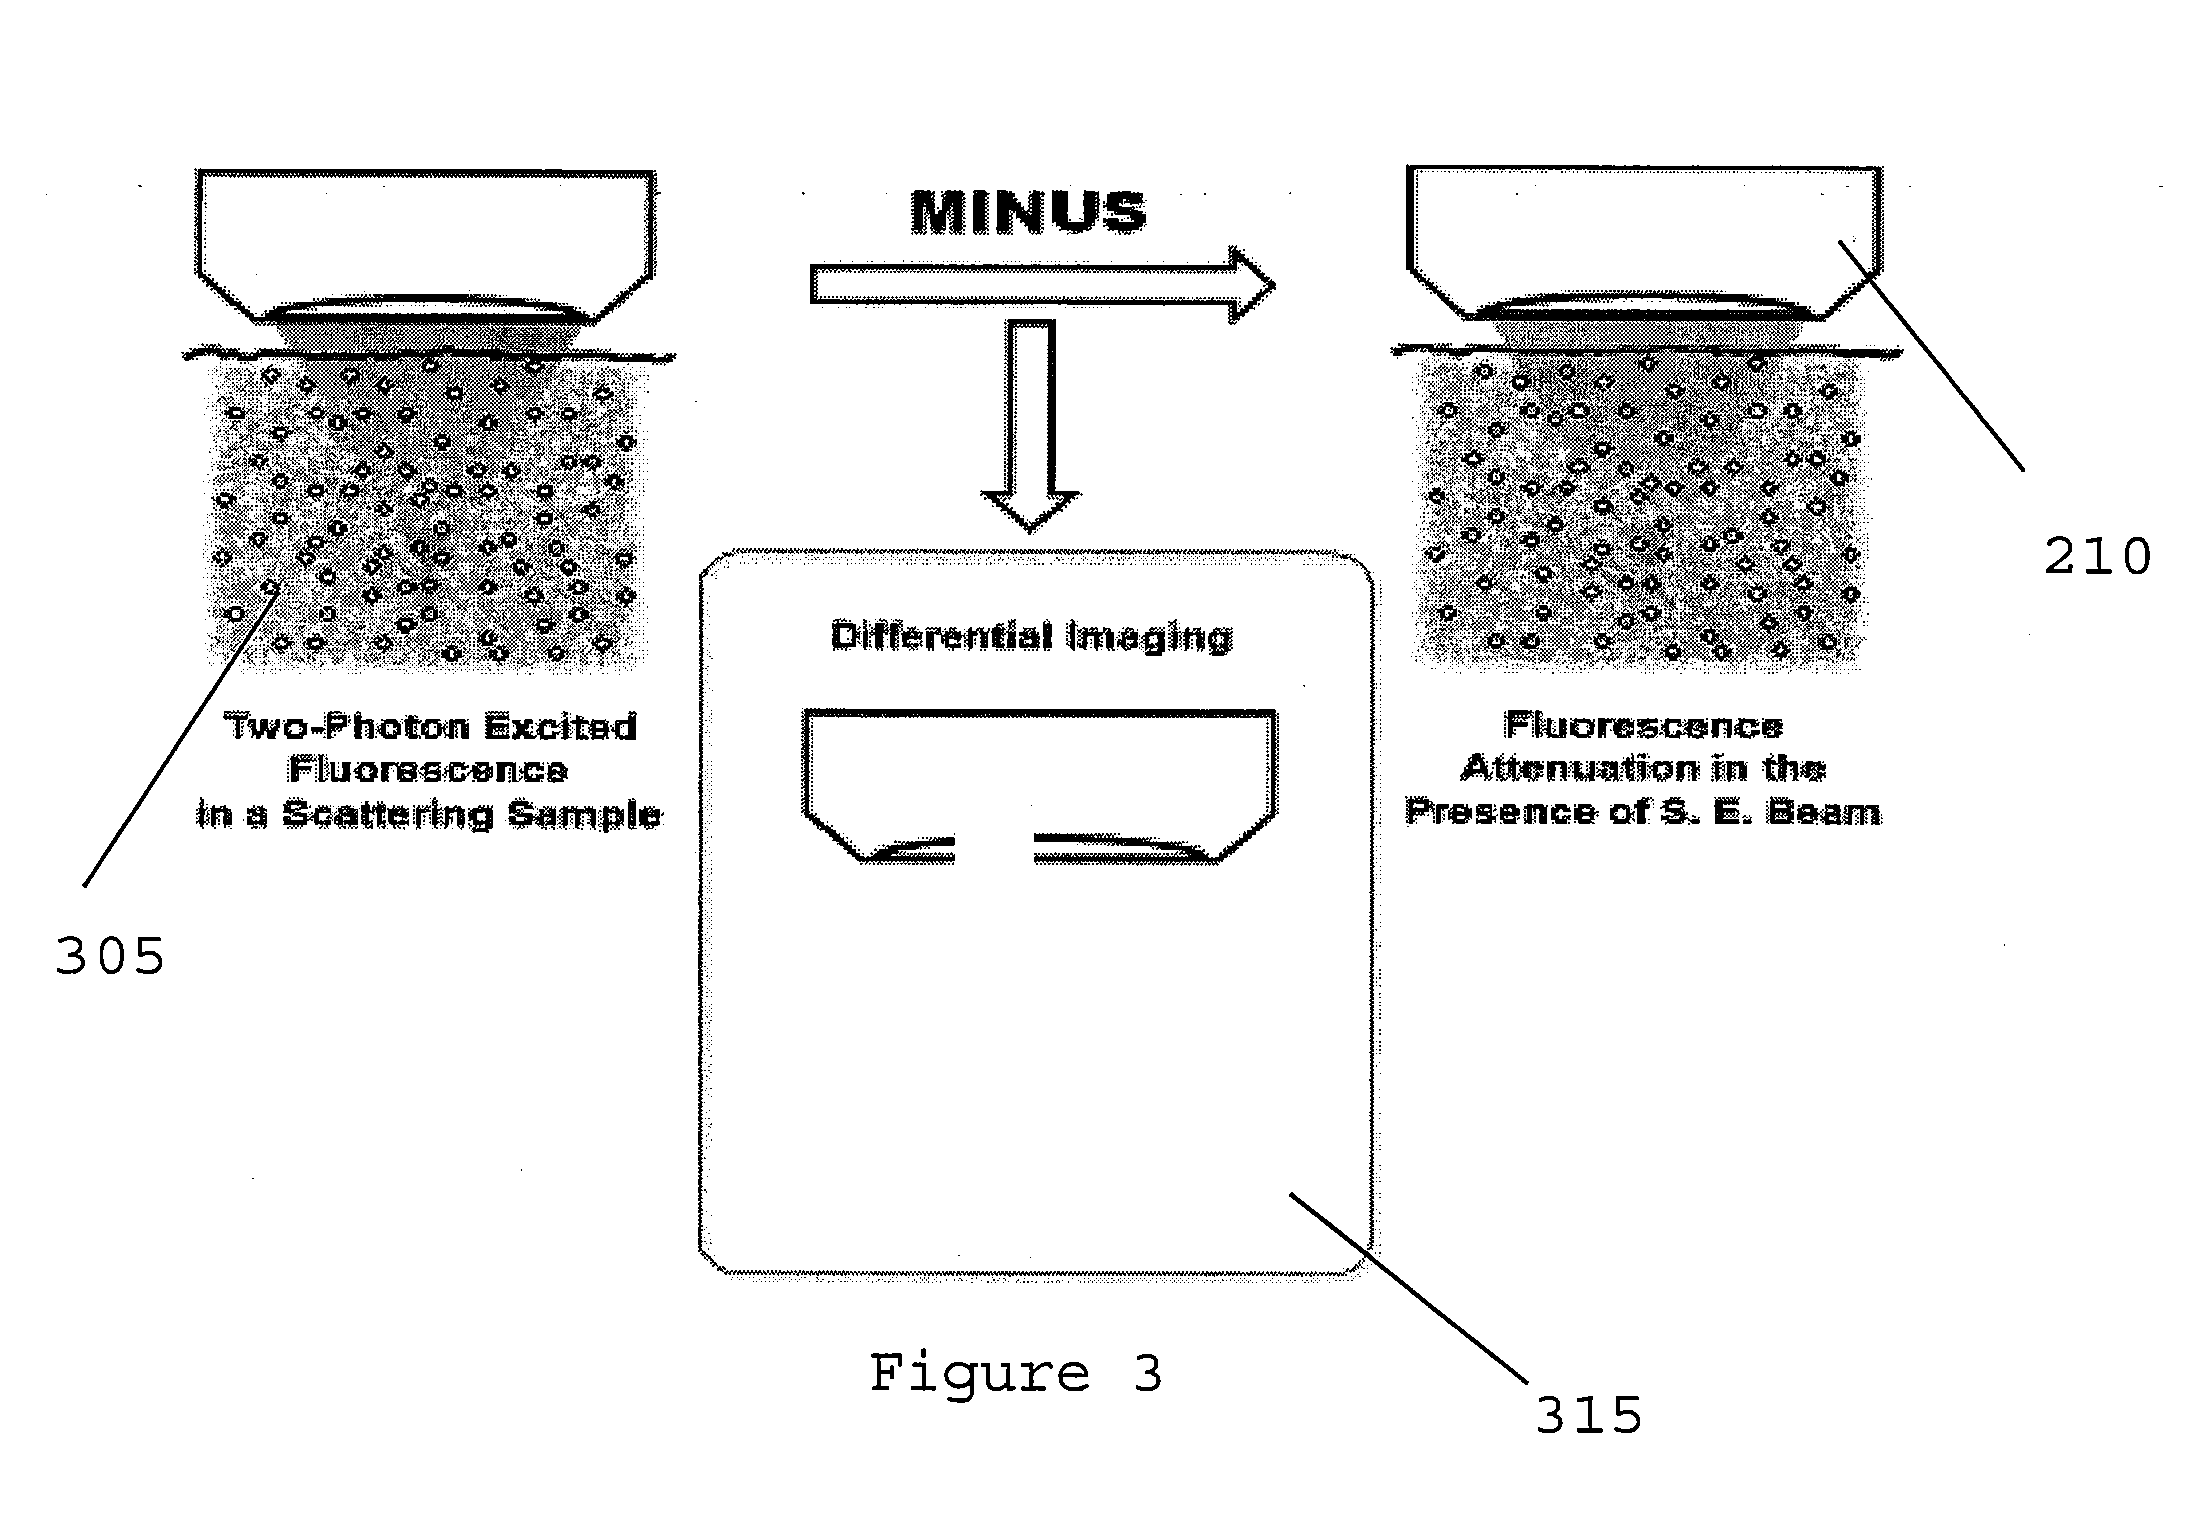 System, method and computer-accessible medium for providing fluorescence attenuation